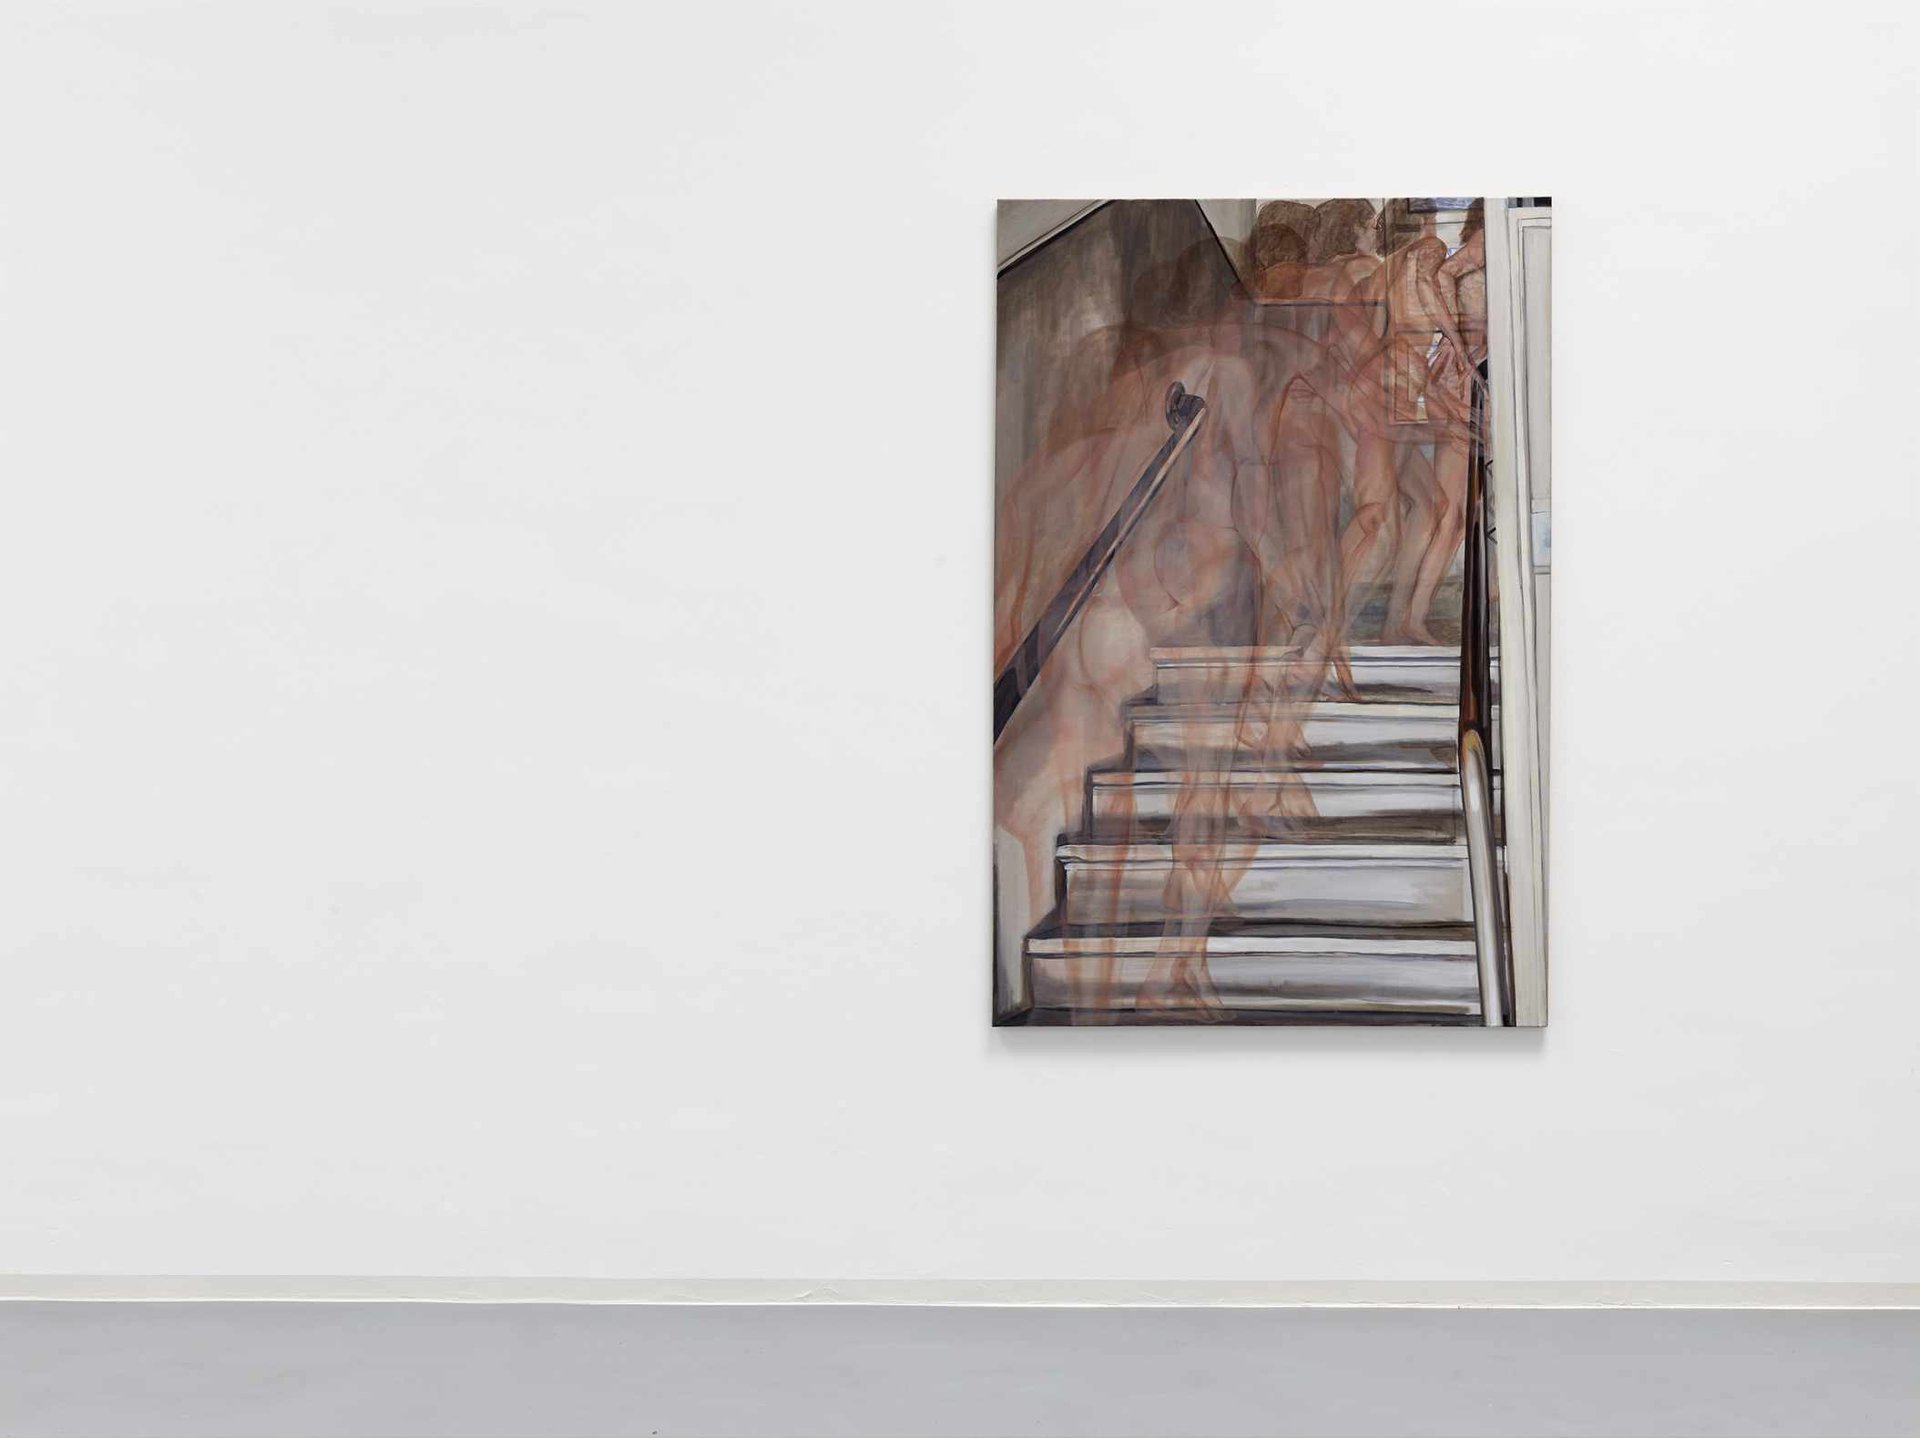 Jana Euler, Nude climbing up stairs. Installation view, Where the Energy Comes From, 2014, Bonner Kunstverein. Courtesy the artist. Photo: Simon Vogel